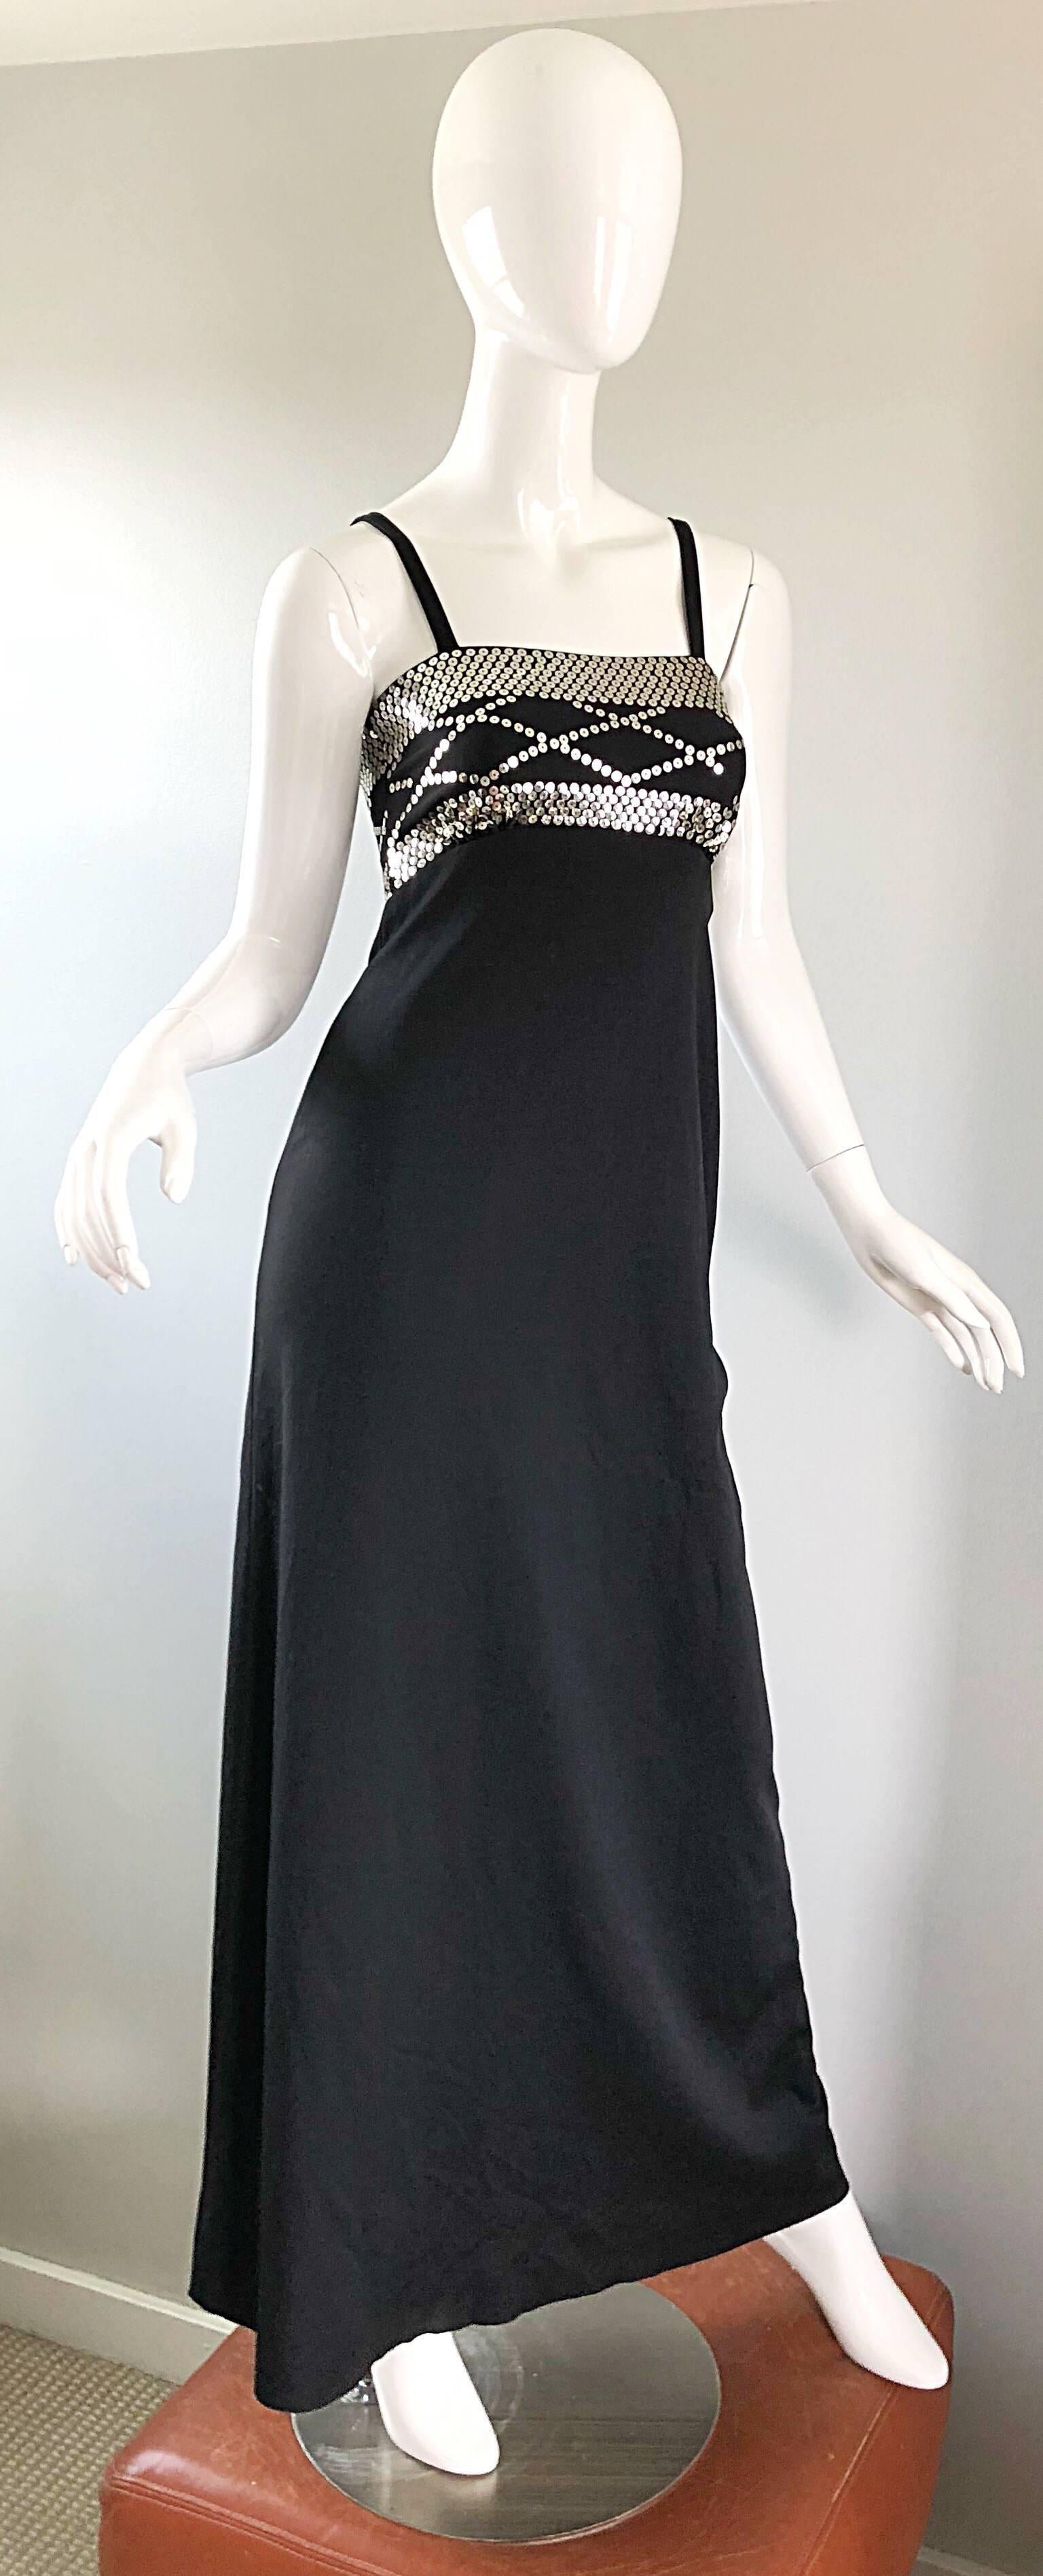 Disco chic 1970s black and silver jersey maxi dress! Features silver sequins at the bust in geometric shapes. Stretch jersey is lightweight and comfortable. Hidden zipper up th eback with hook-and-eye closure. Great with sandals, wedges or heels.